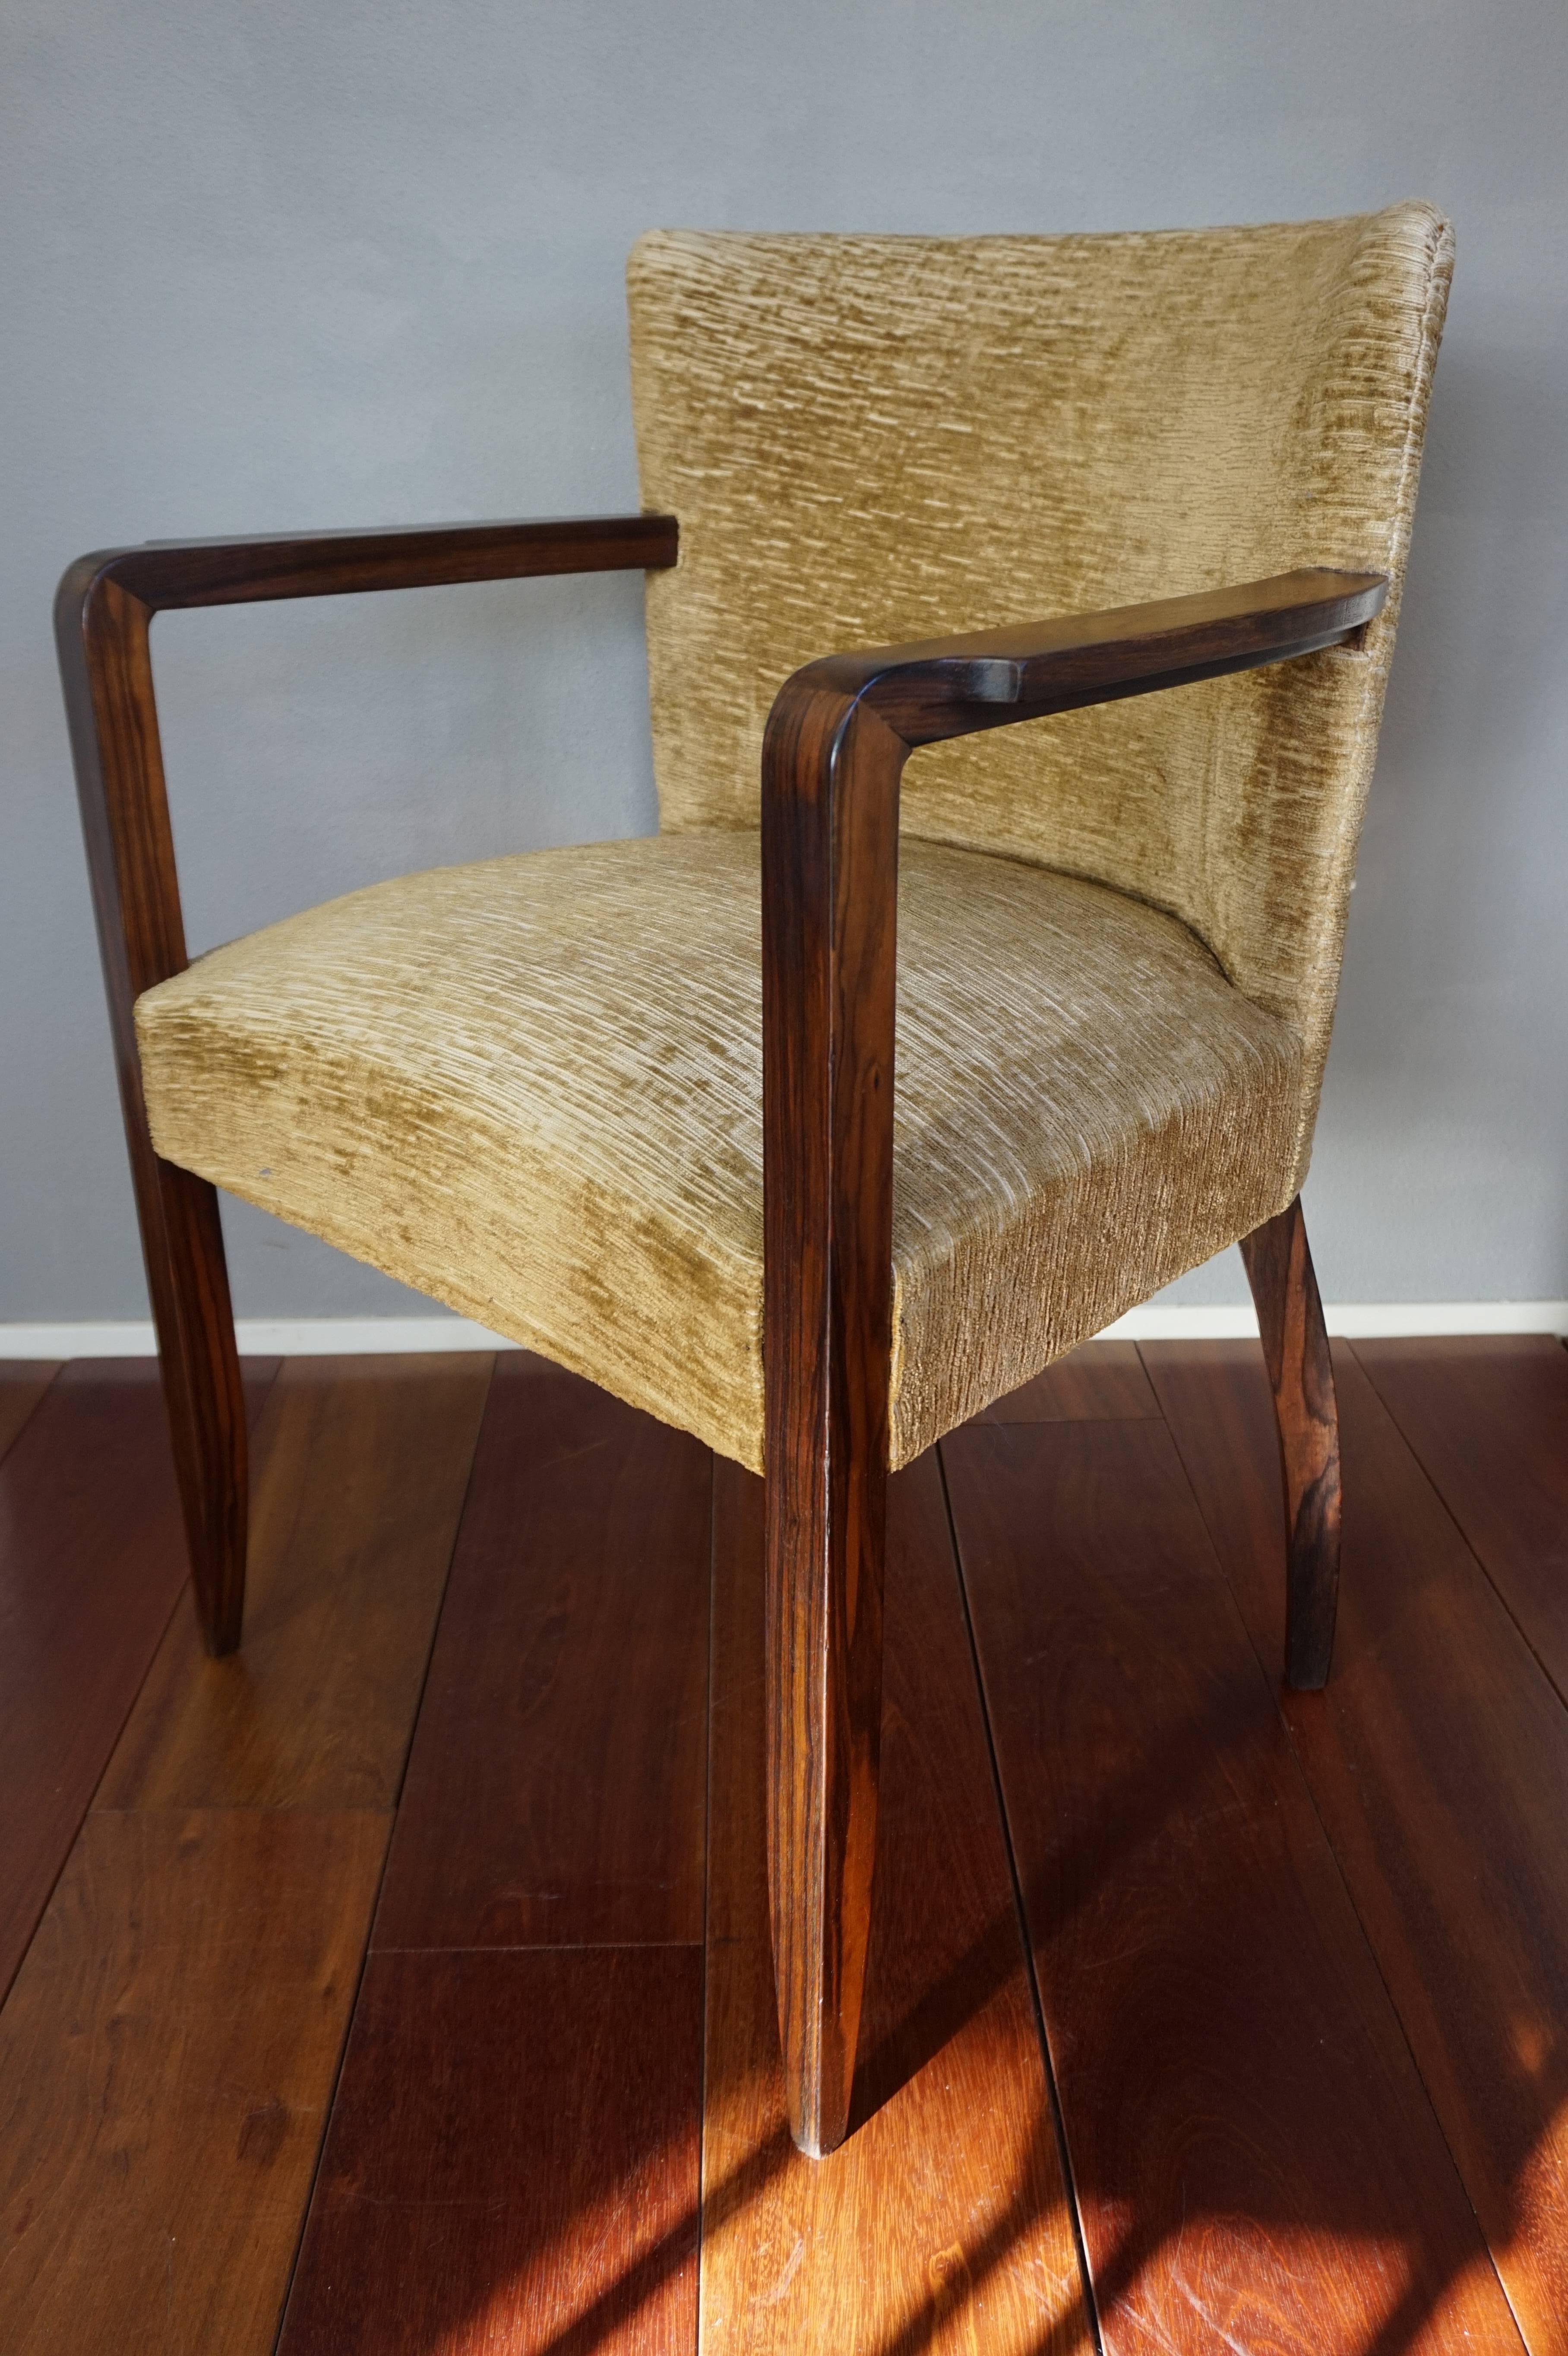 European Stunning and Hand-Crafted Solid Macassar Ebony Art Deco Armchair or Desk Chair